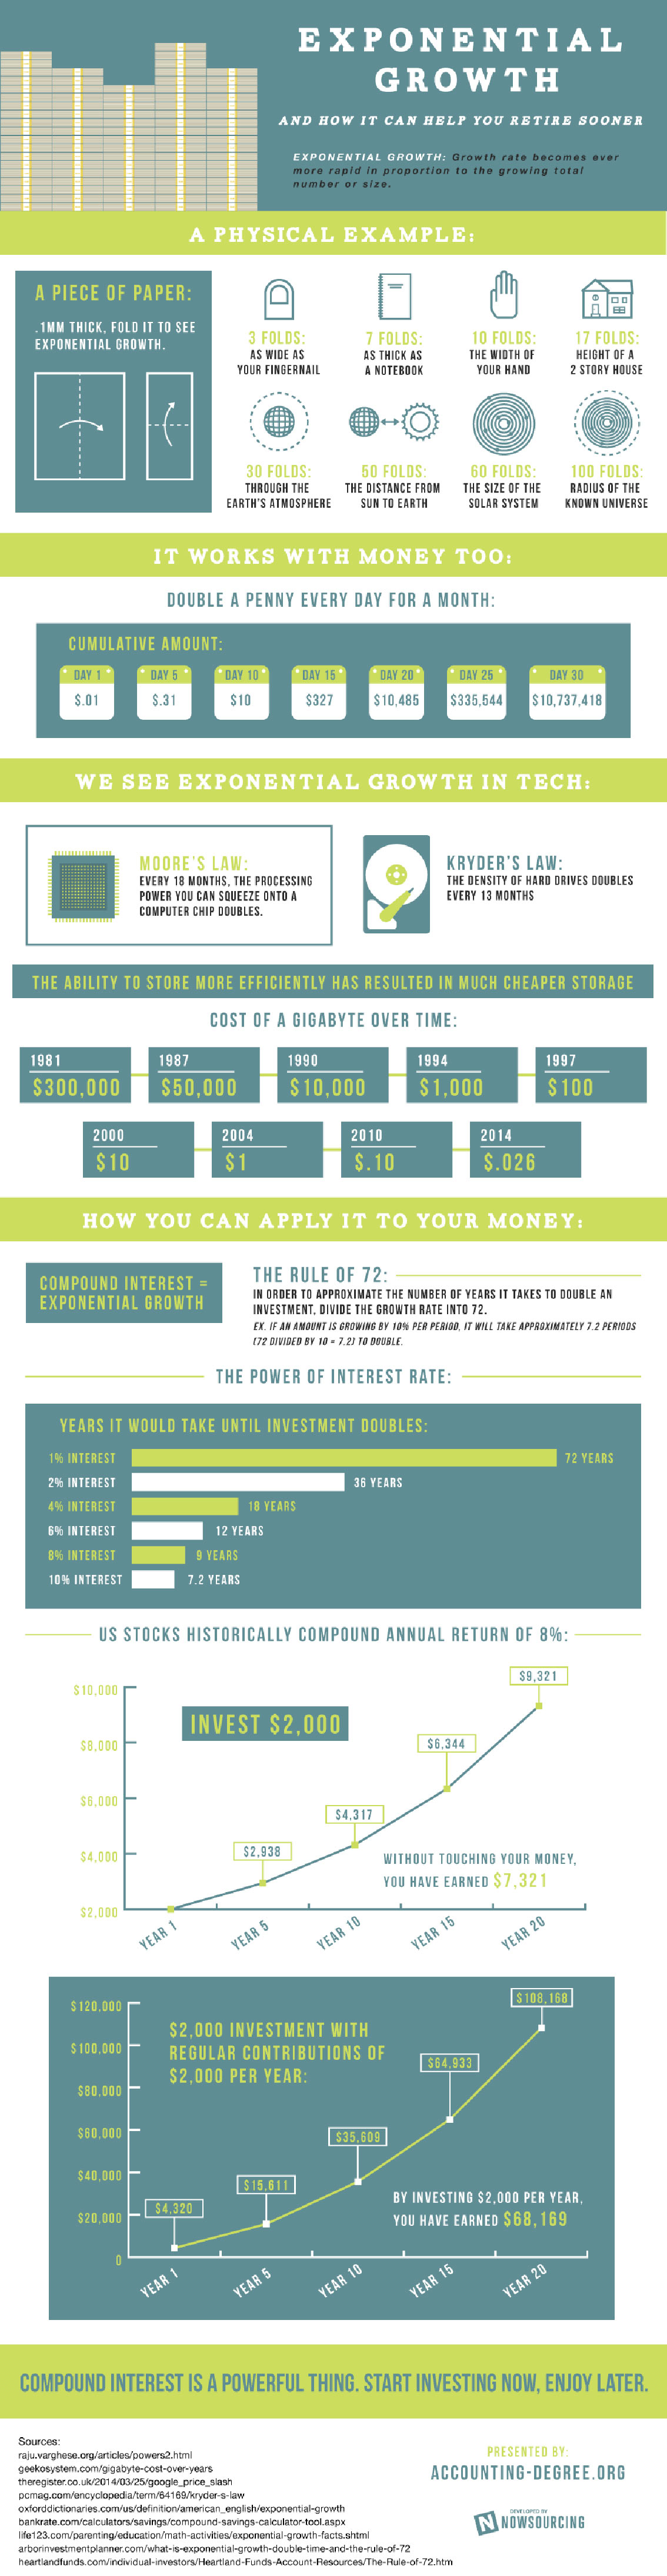 Exponential Growth of Compound Interest  Infographic